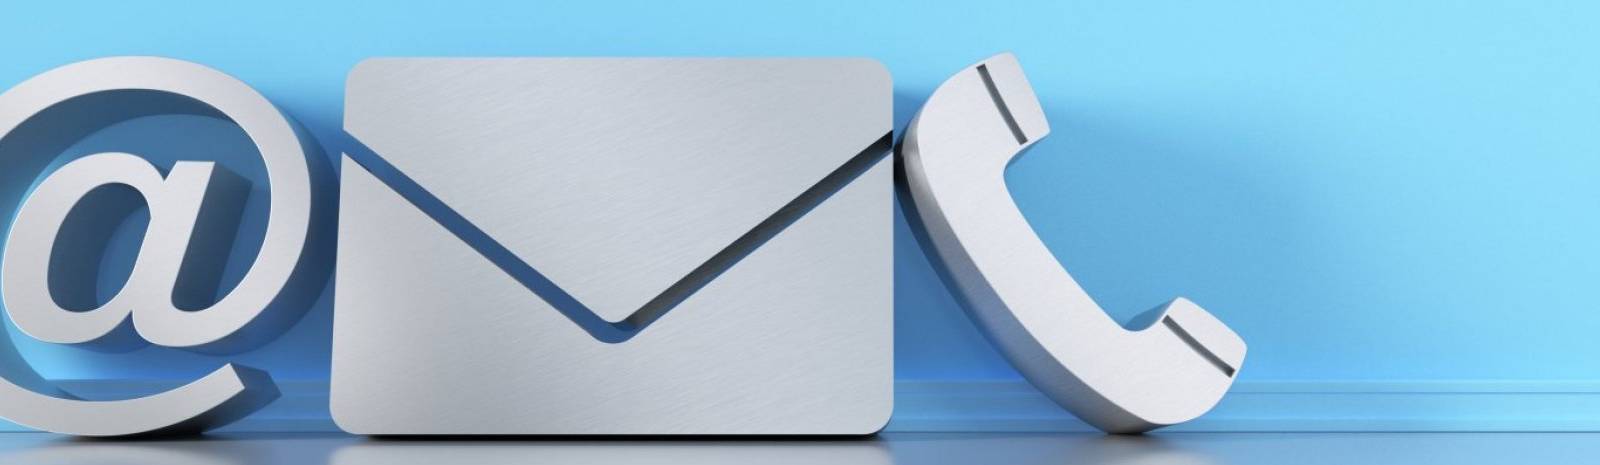 silver at, envelope and phone symbol against blue background